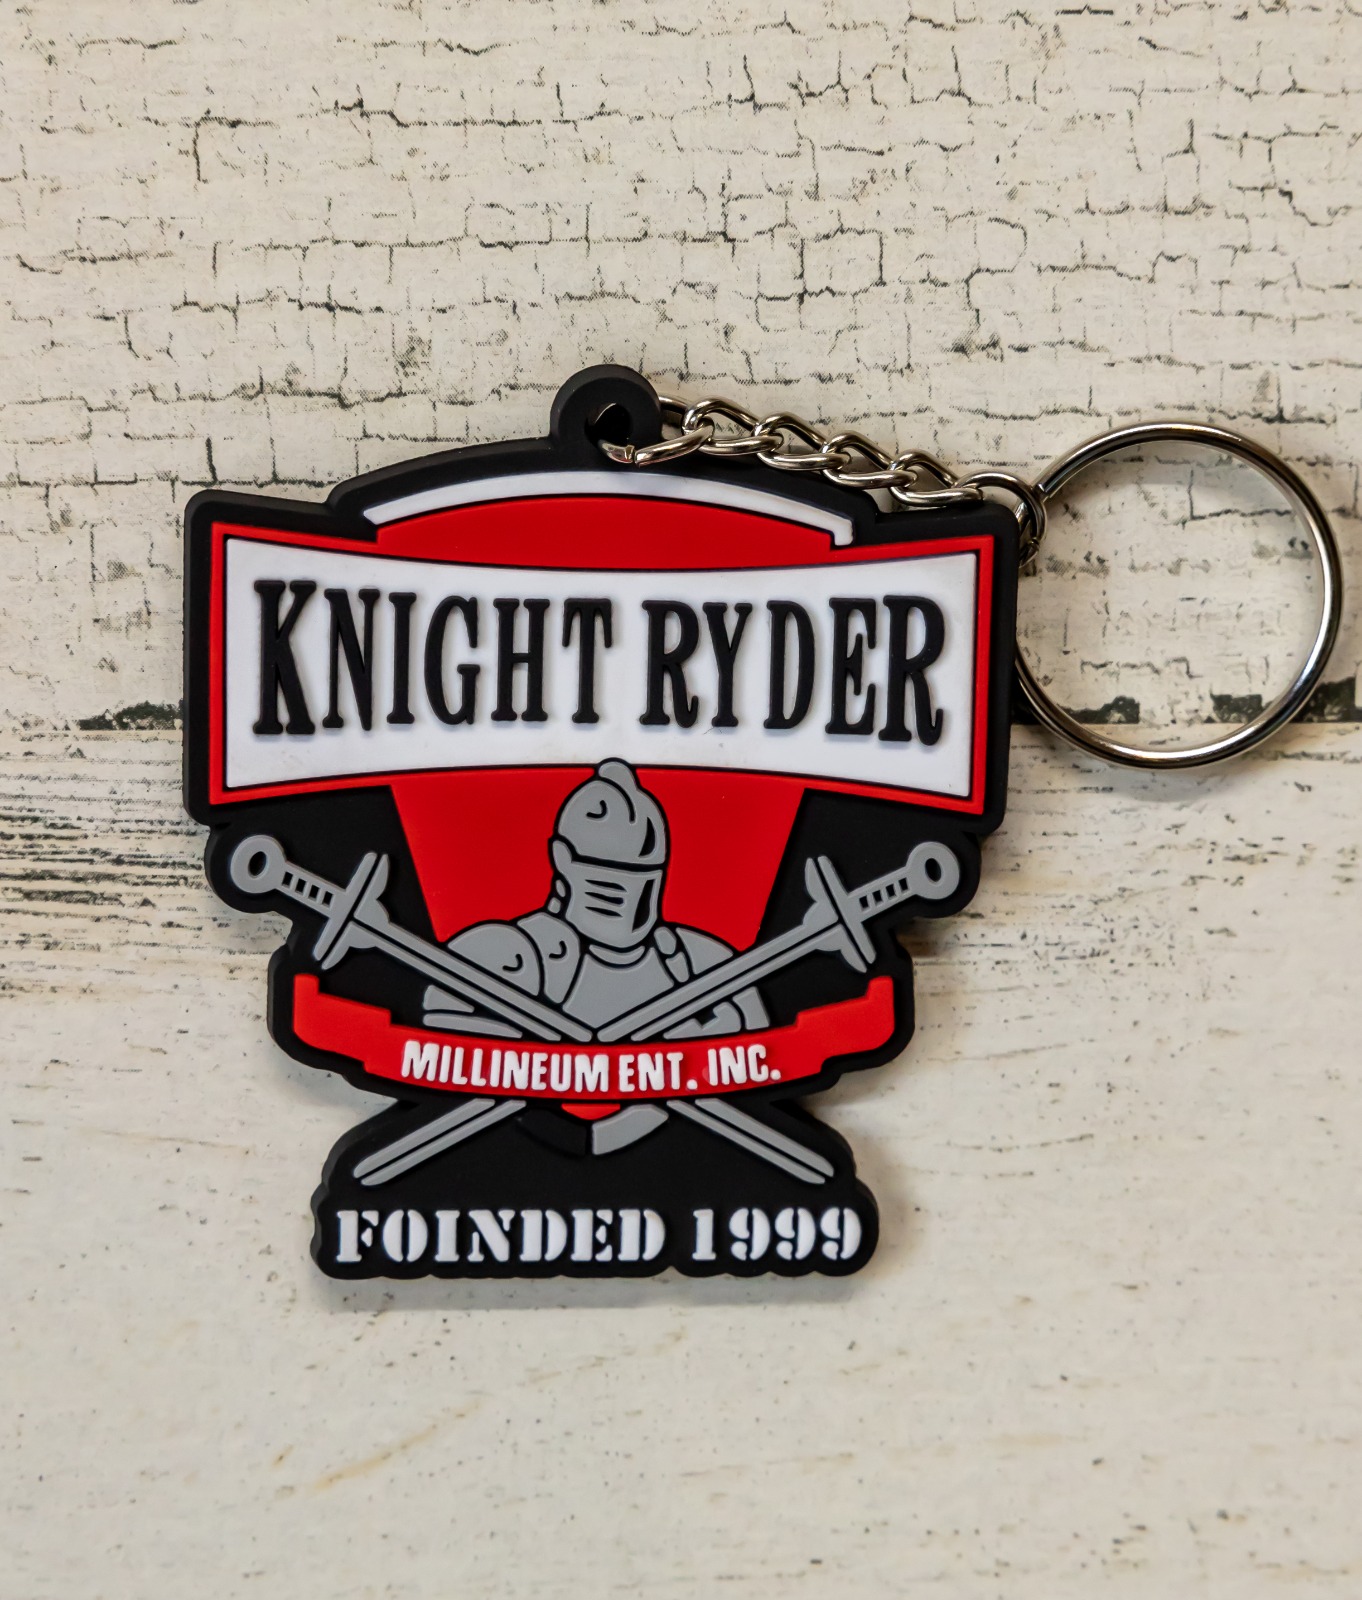 A keychain that says knight ryder, founded 1 9 9 9.